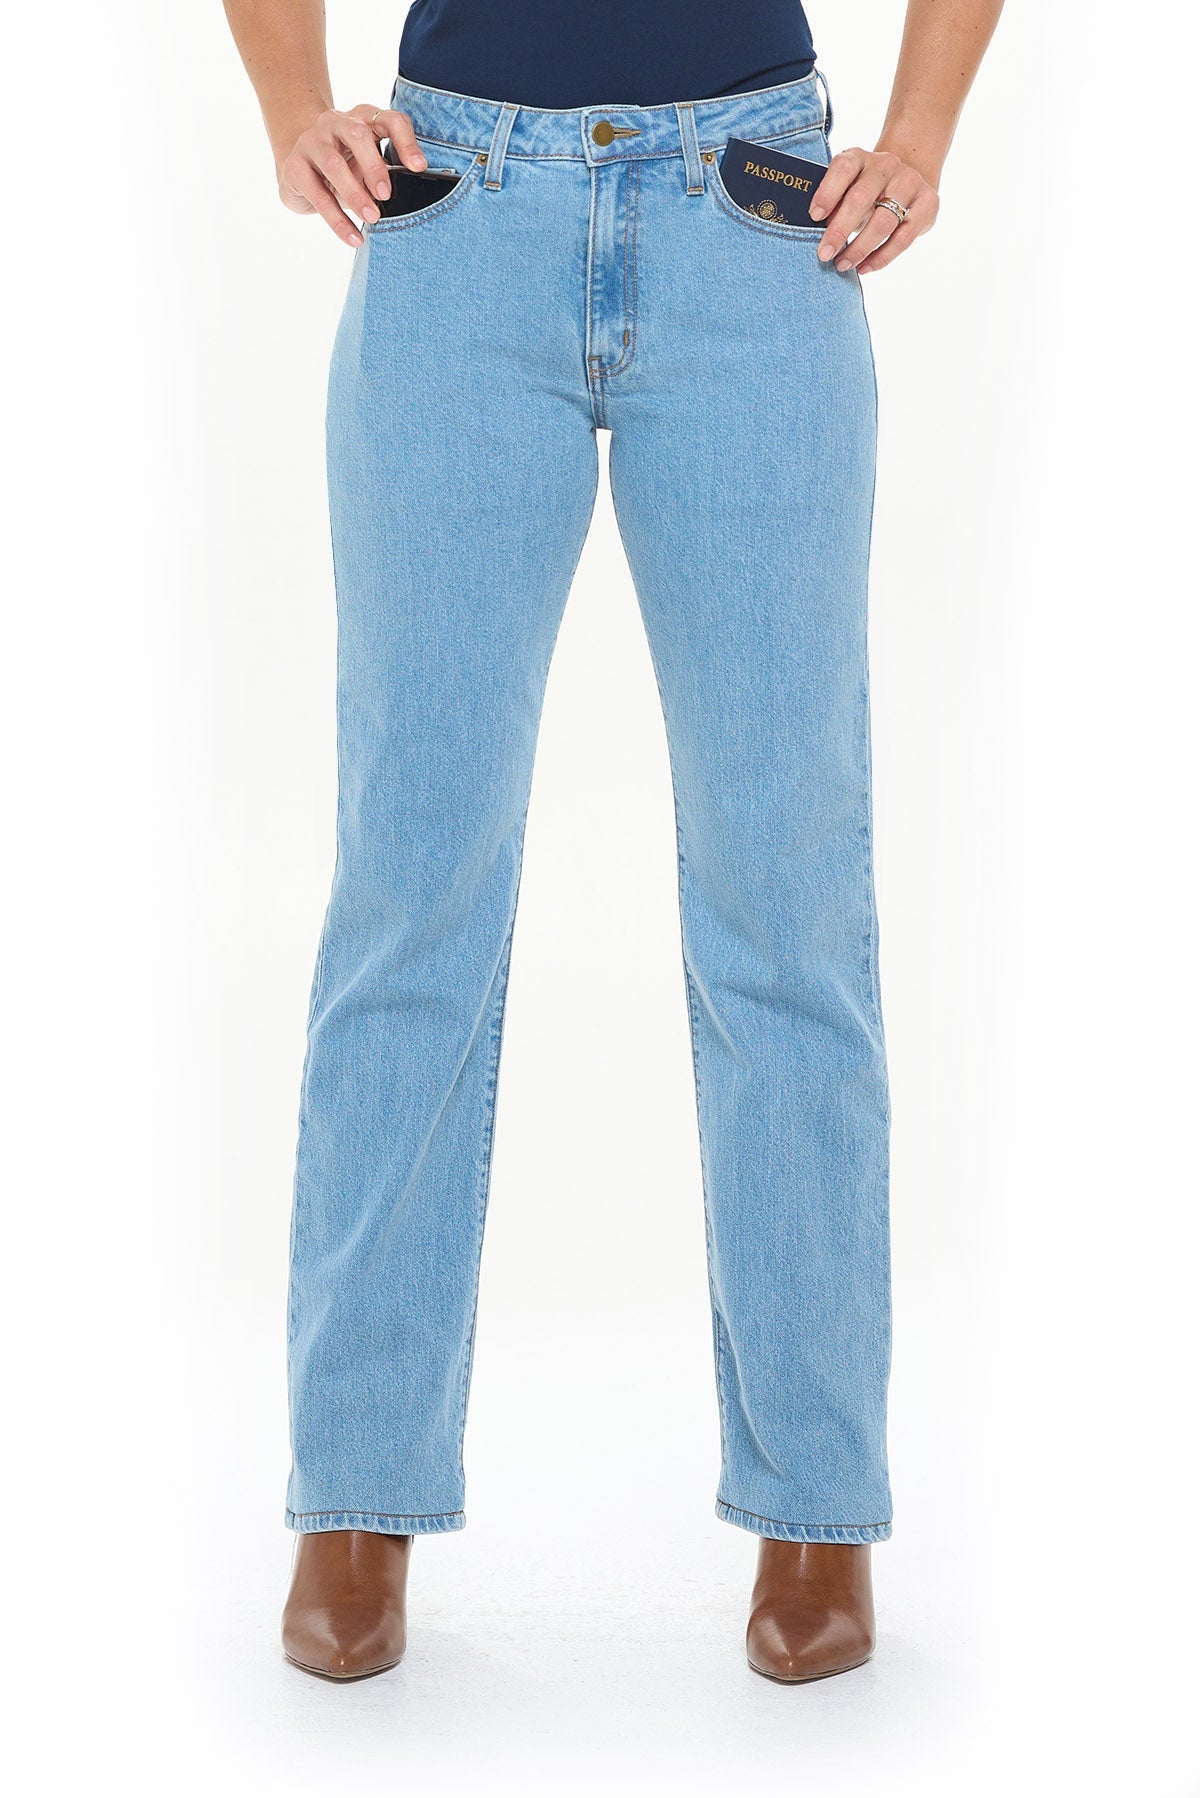 Vintage | Best Travel Jeans | Relaxed | Faded Indigo